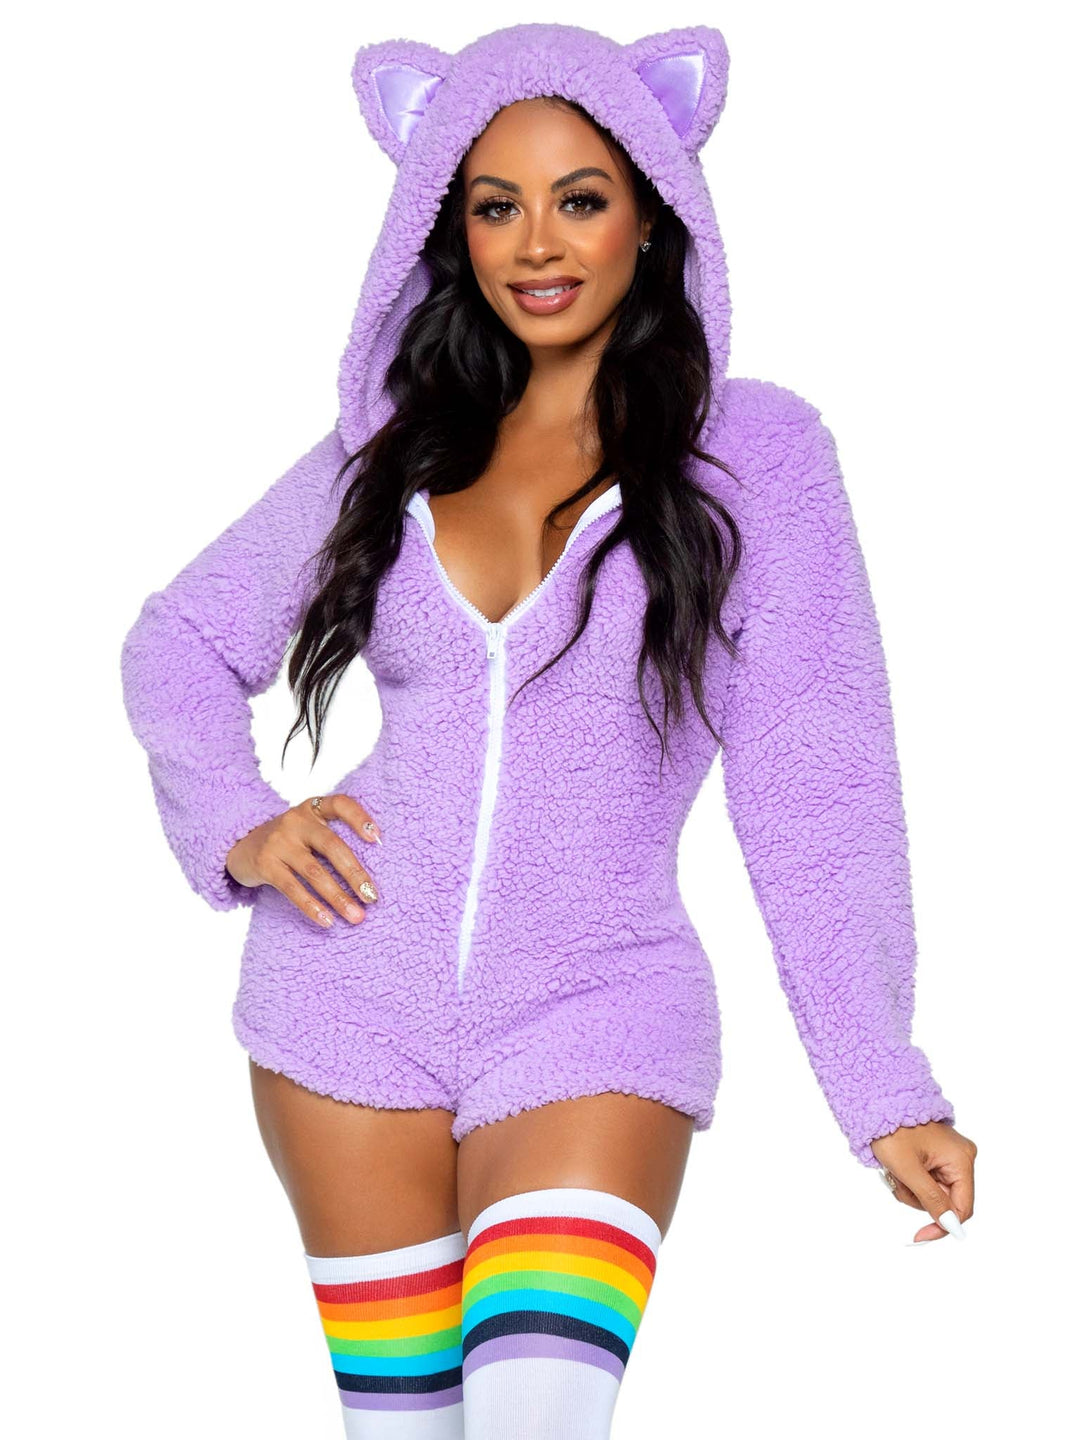 Cuddle Kitty Plush Romper with Attached Tail and Ear Hood